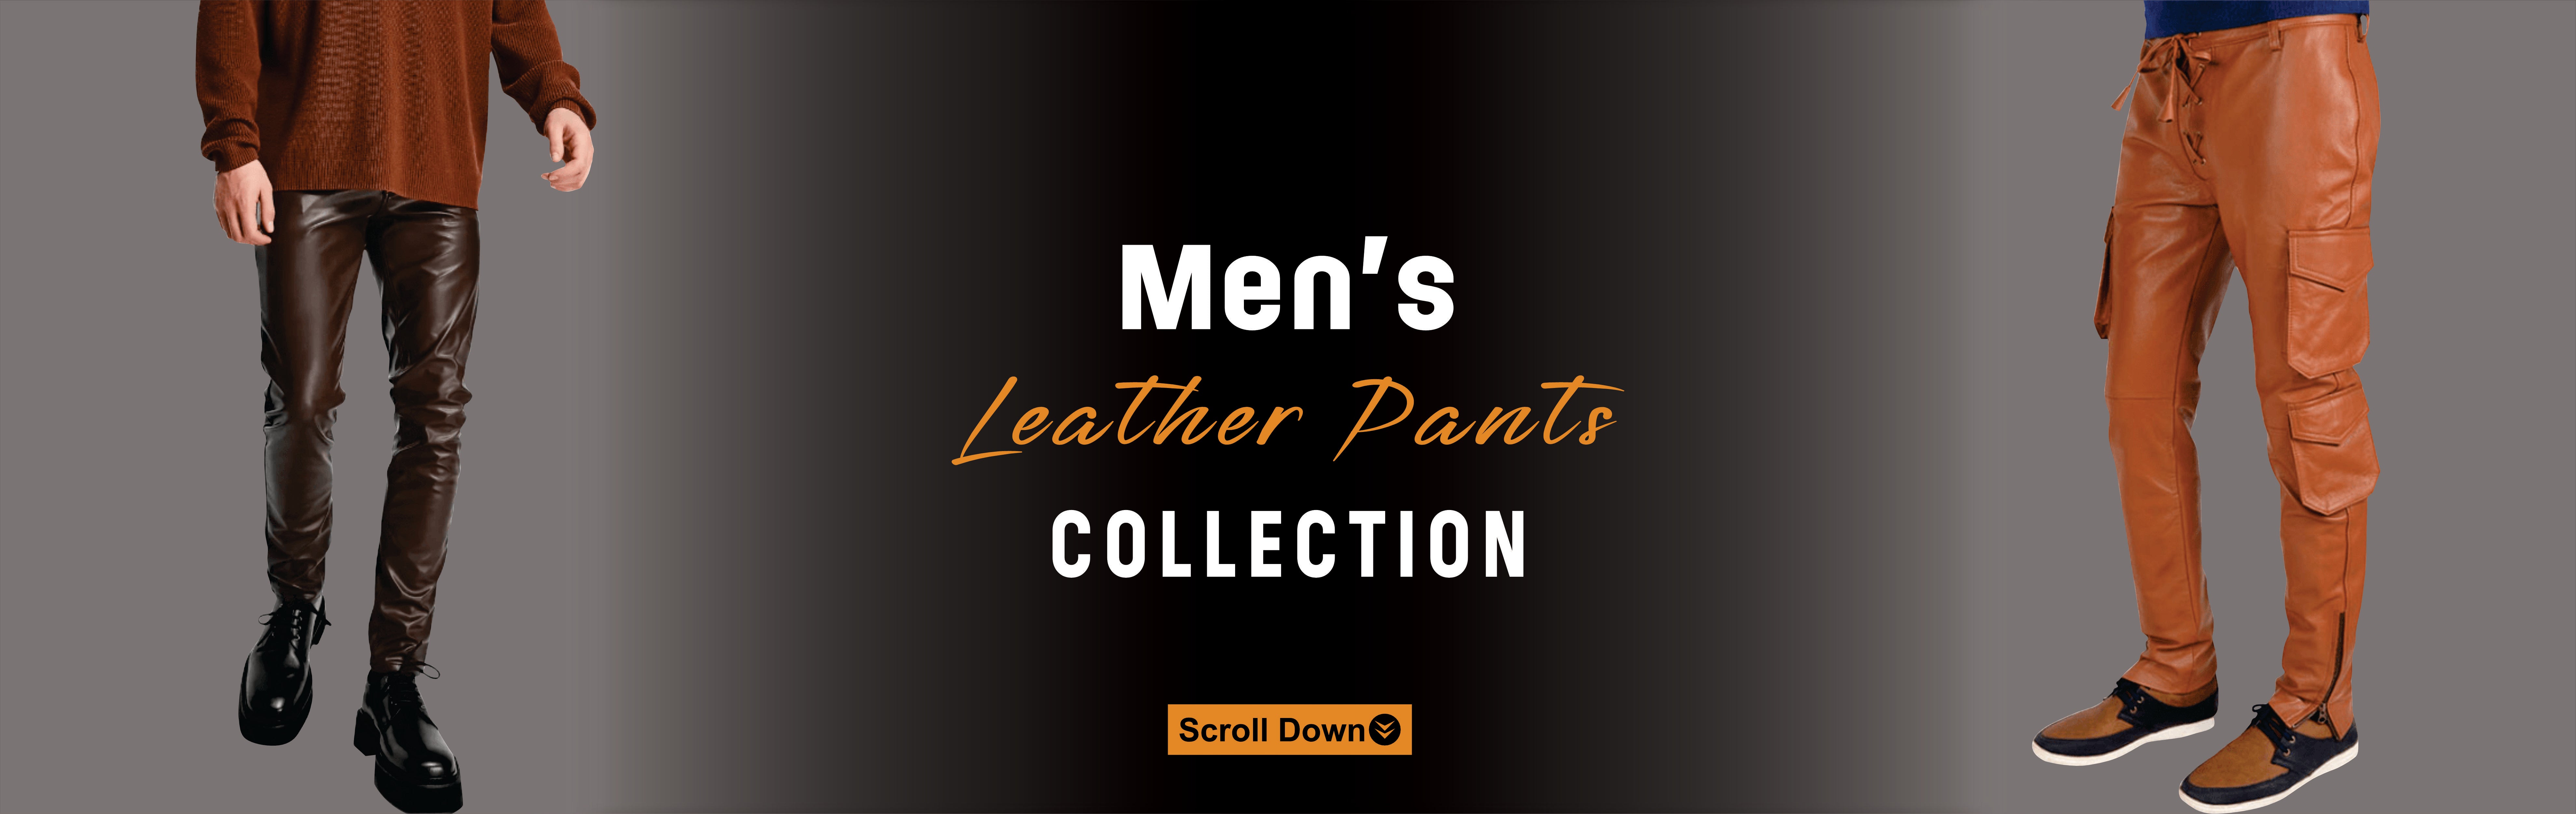 Leather Collection Collection for Men